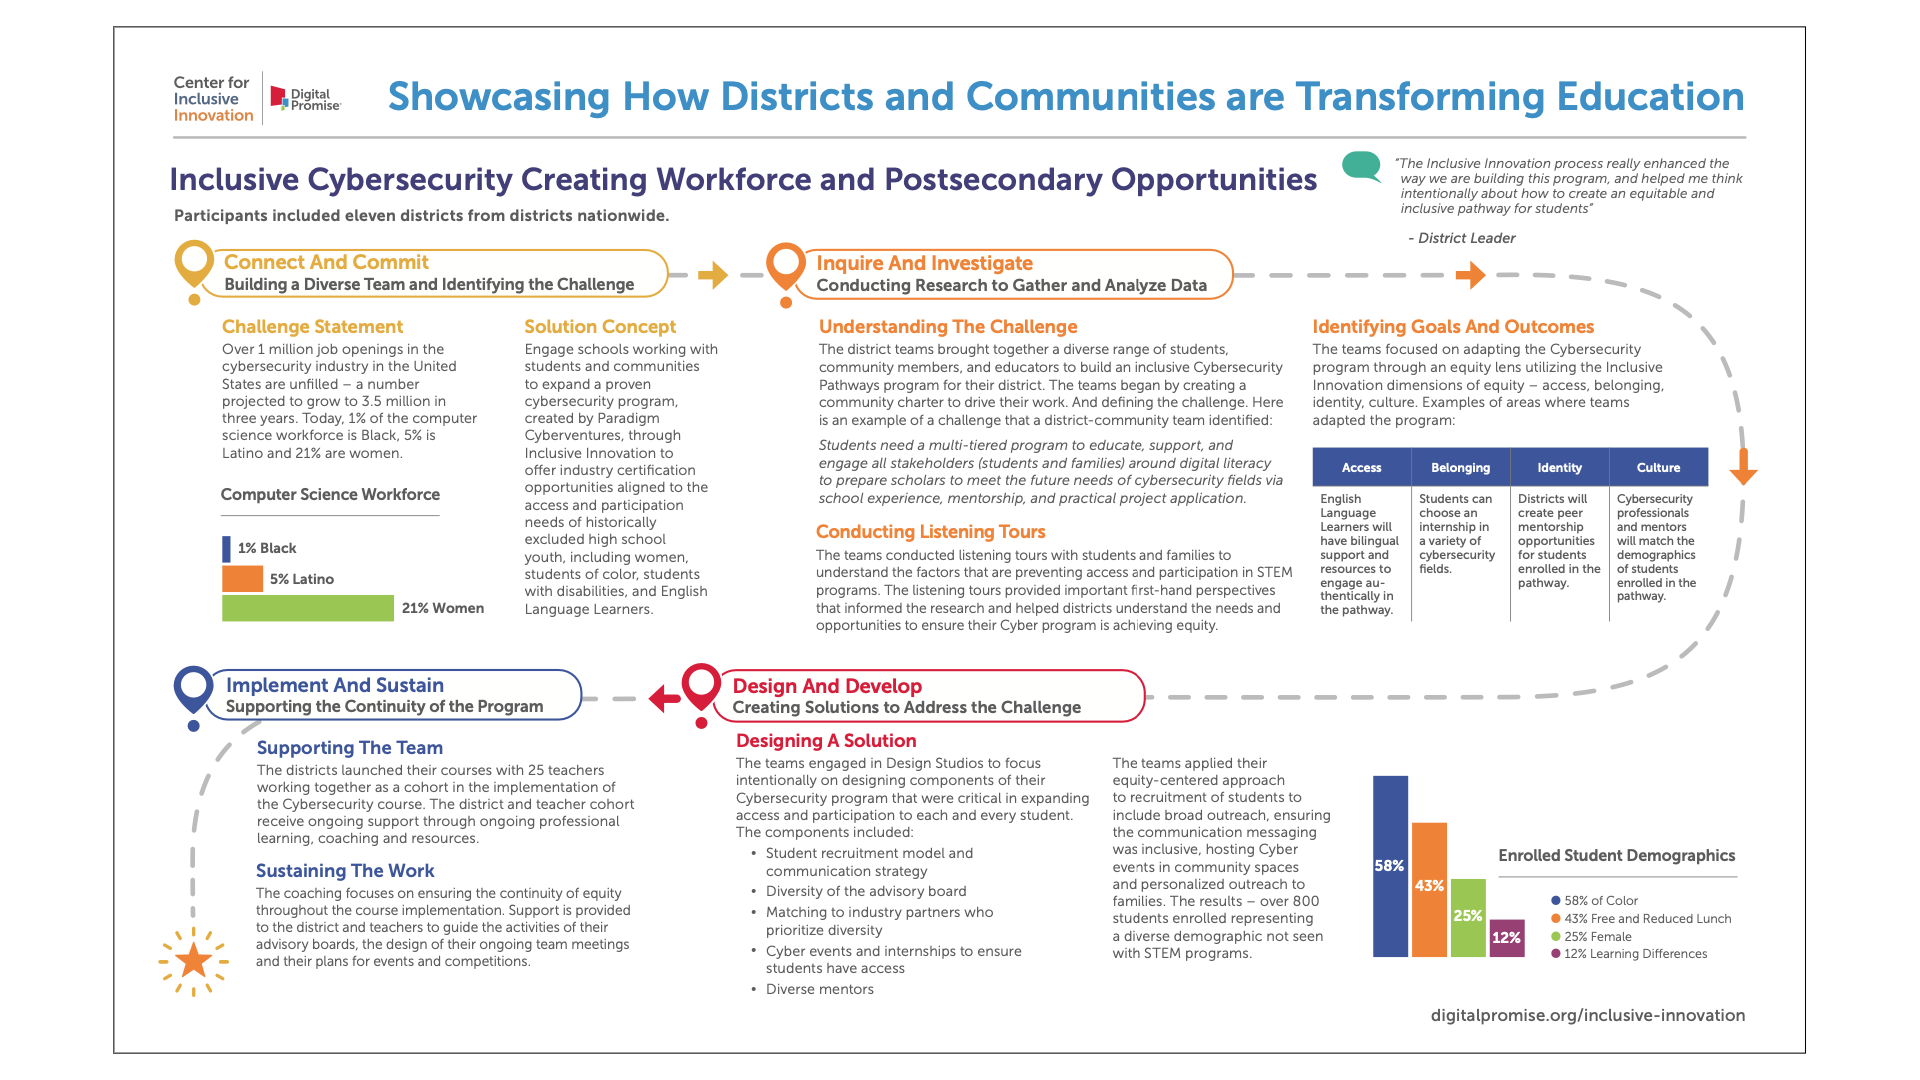 Inclusive Cybersecurity Creating Workforce and Postsecondary Opportunities